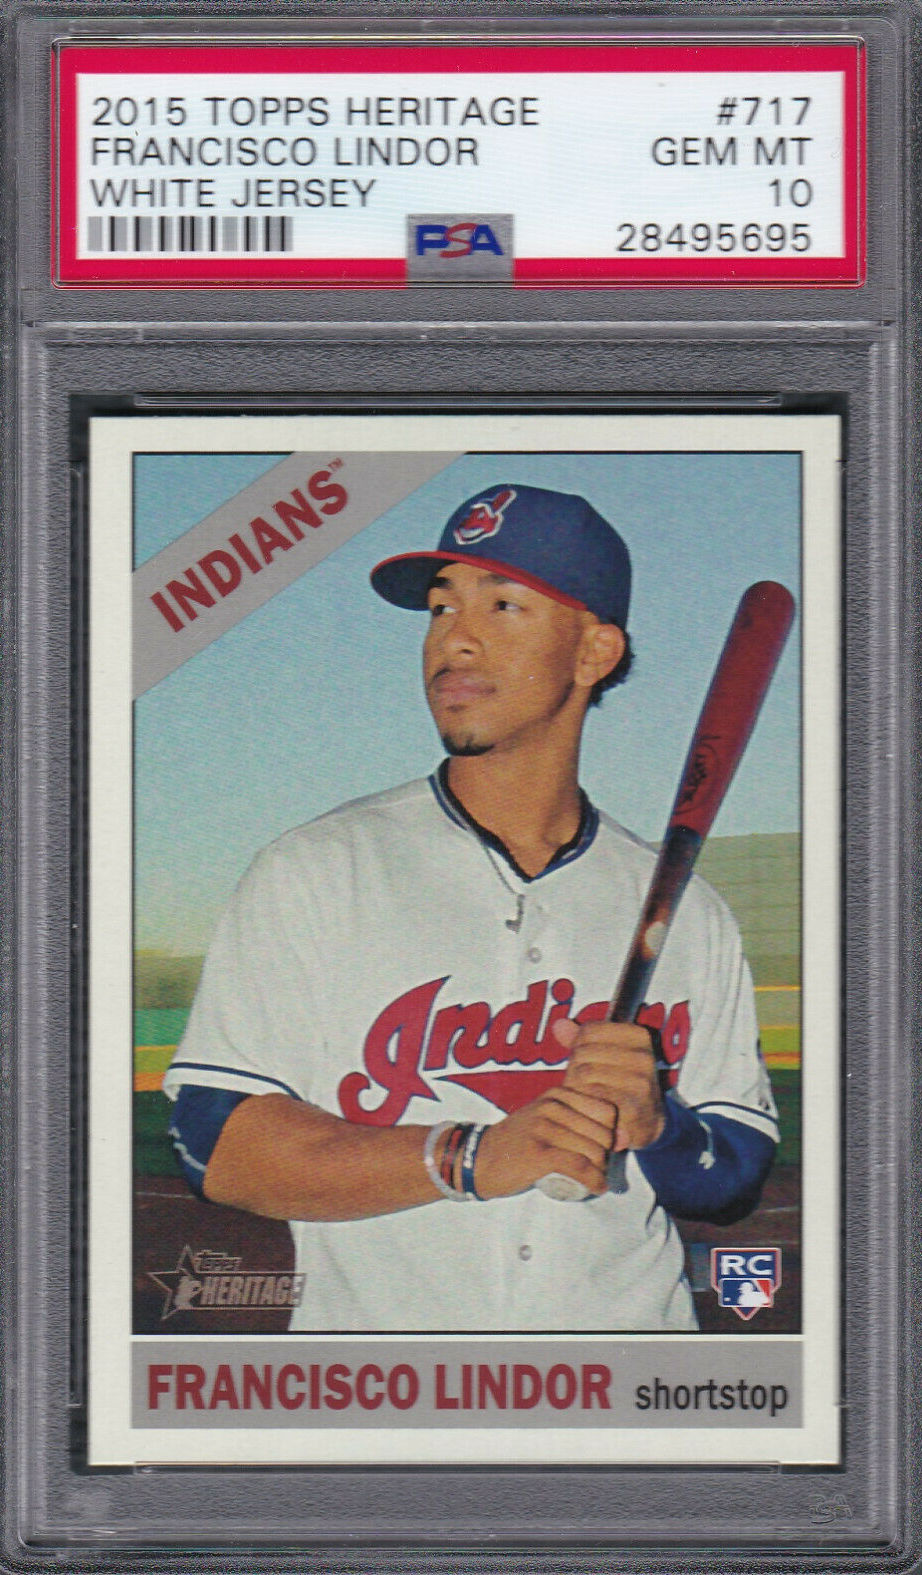 Image of 2015 Topps Heritage High Number Francisco Lindor RC PSA 10 sports trading card